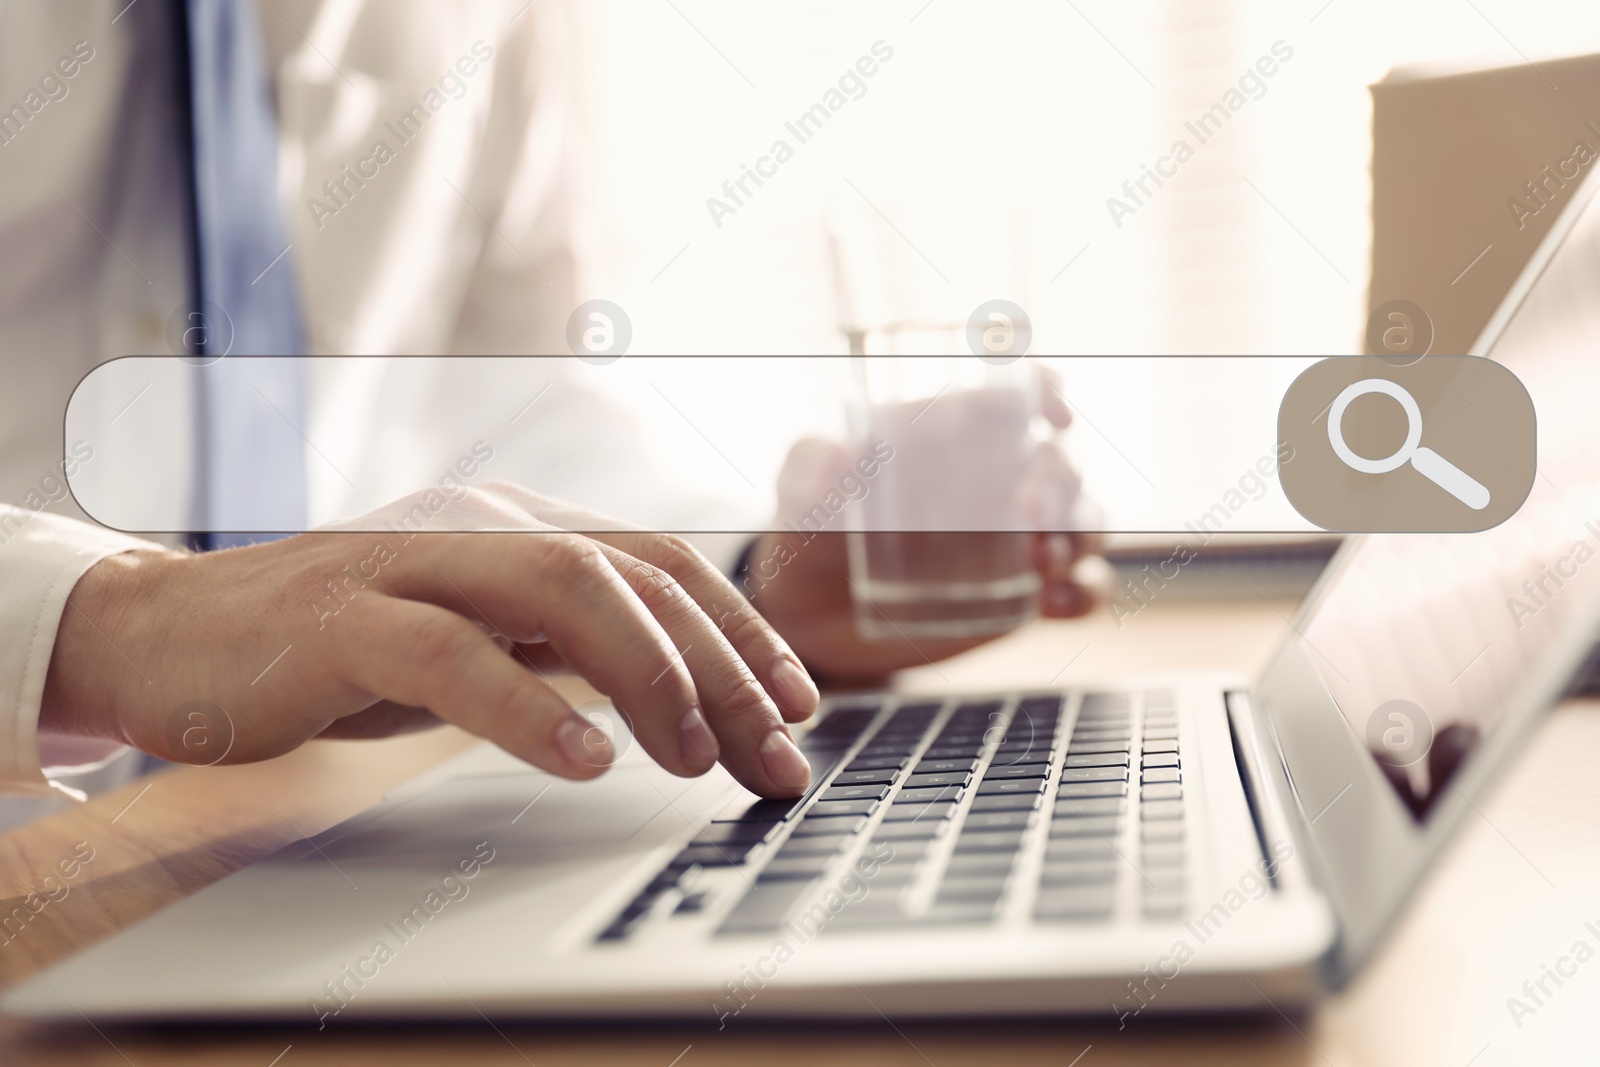 Image of Search bar of internet browser and man working with laptop in office, closeup